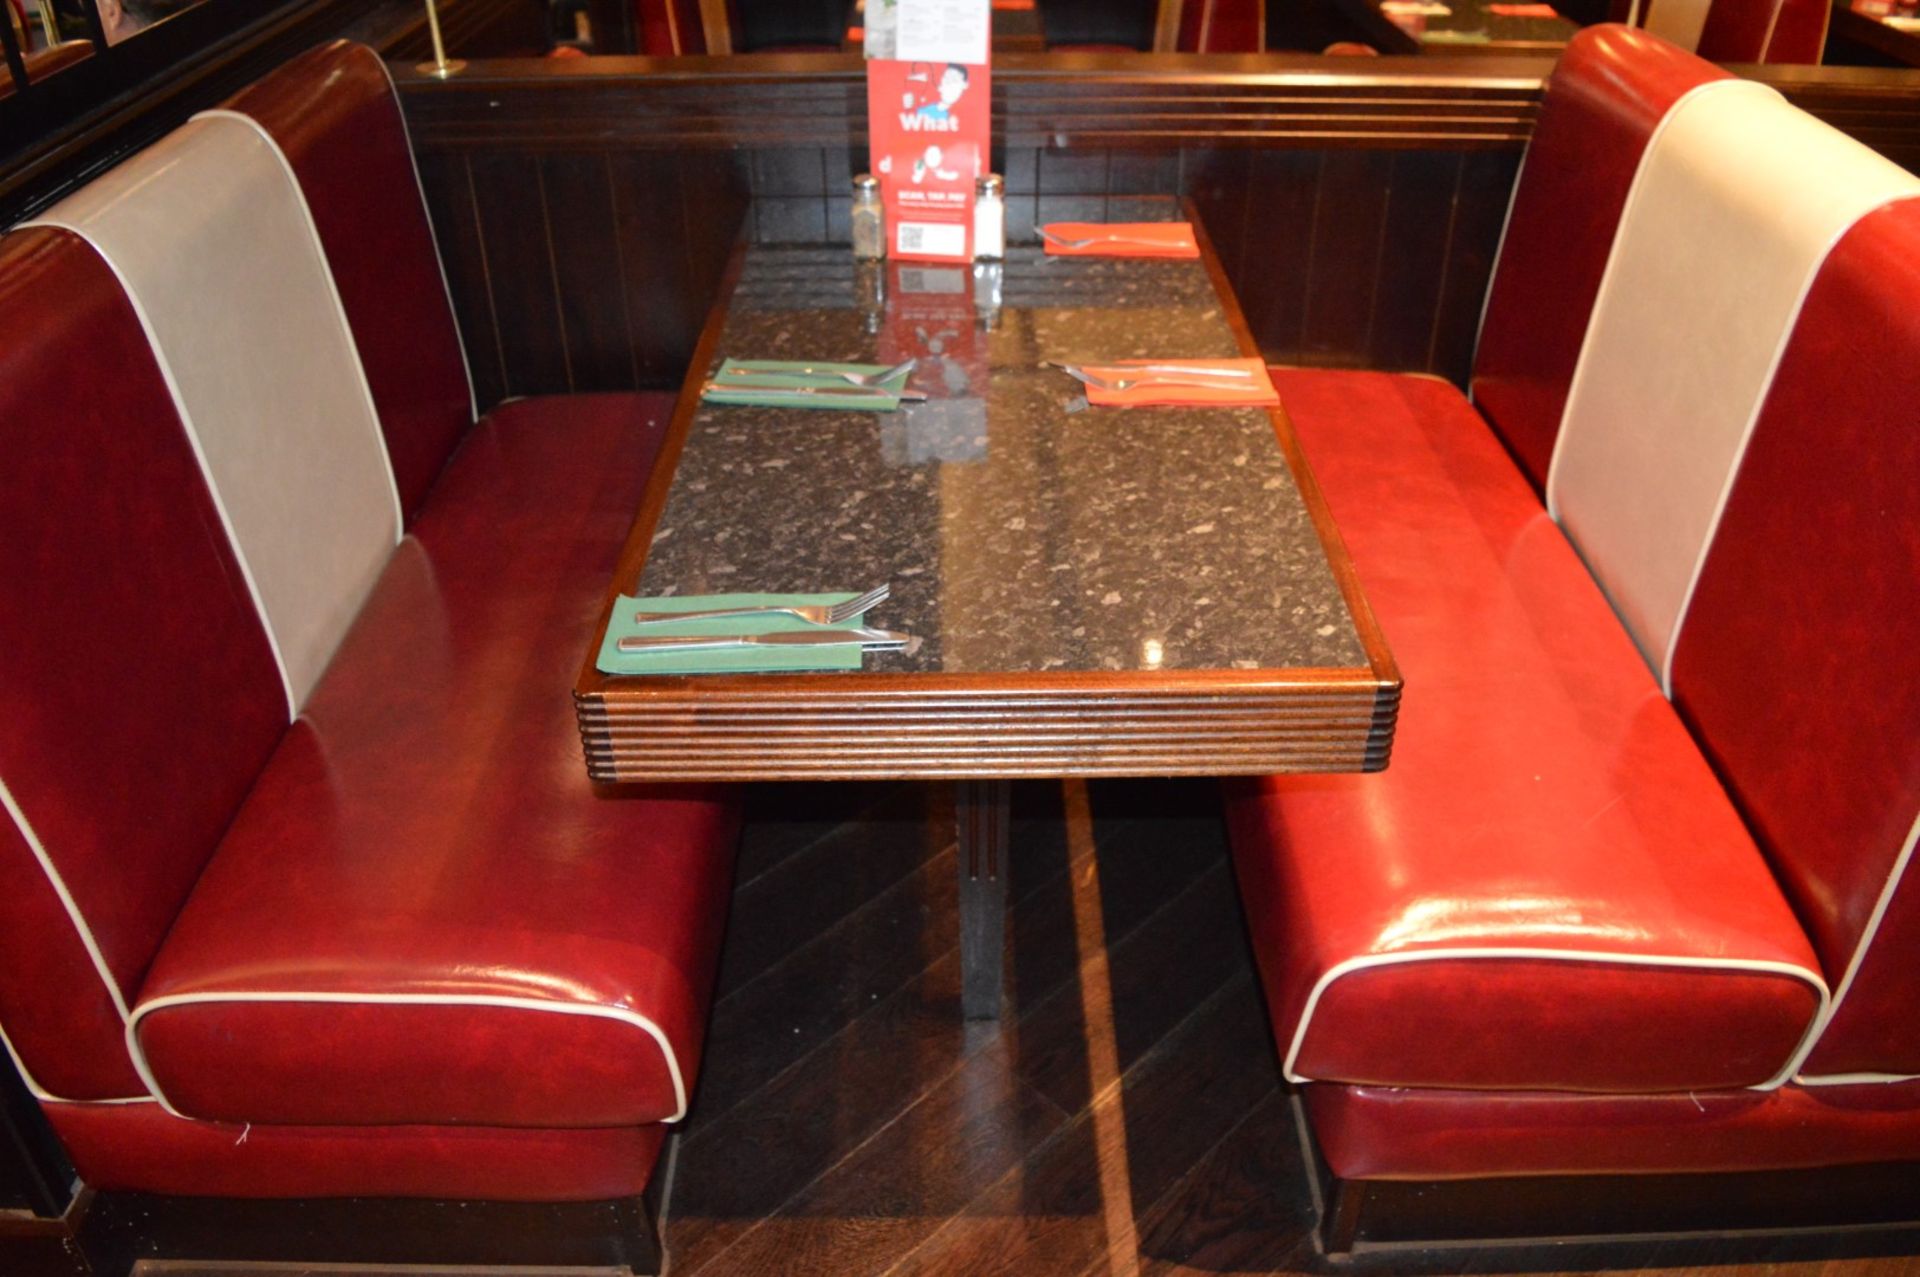 1 x Selection of Seating Booths in a 1950's Retro American Diner Design Supplied in Good Condition - - Image 7 of 7